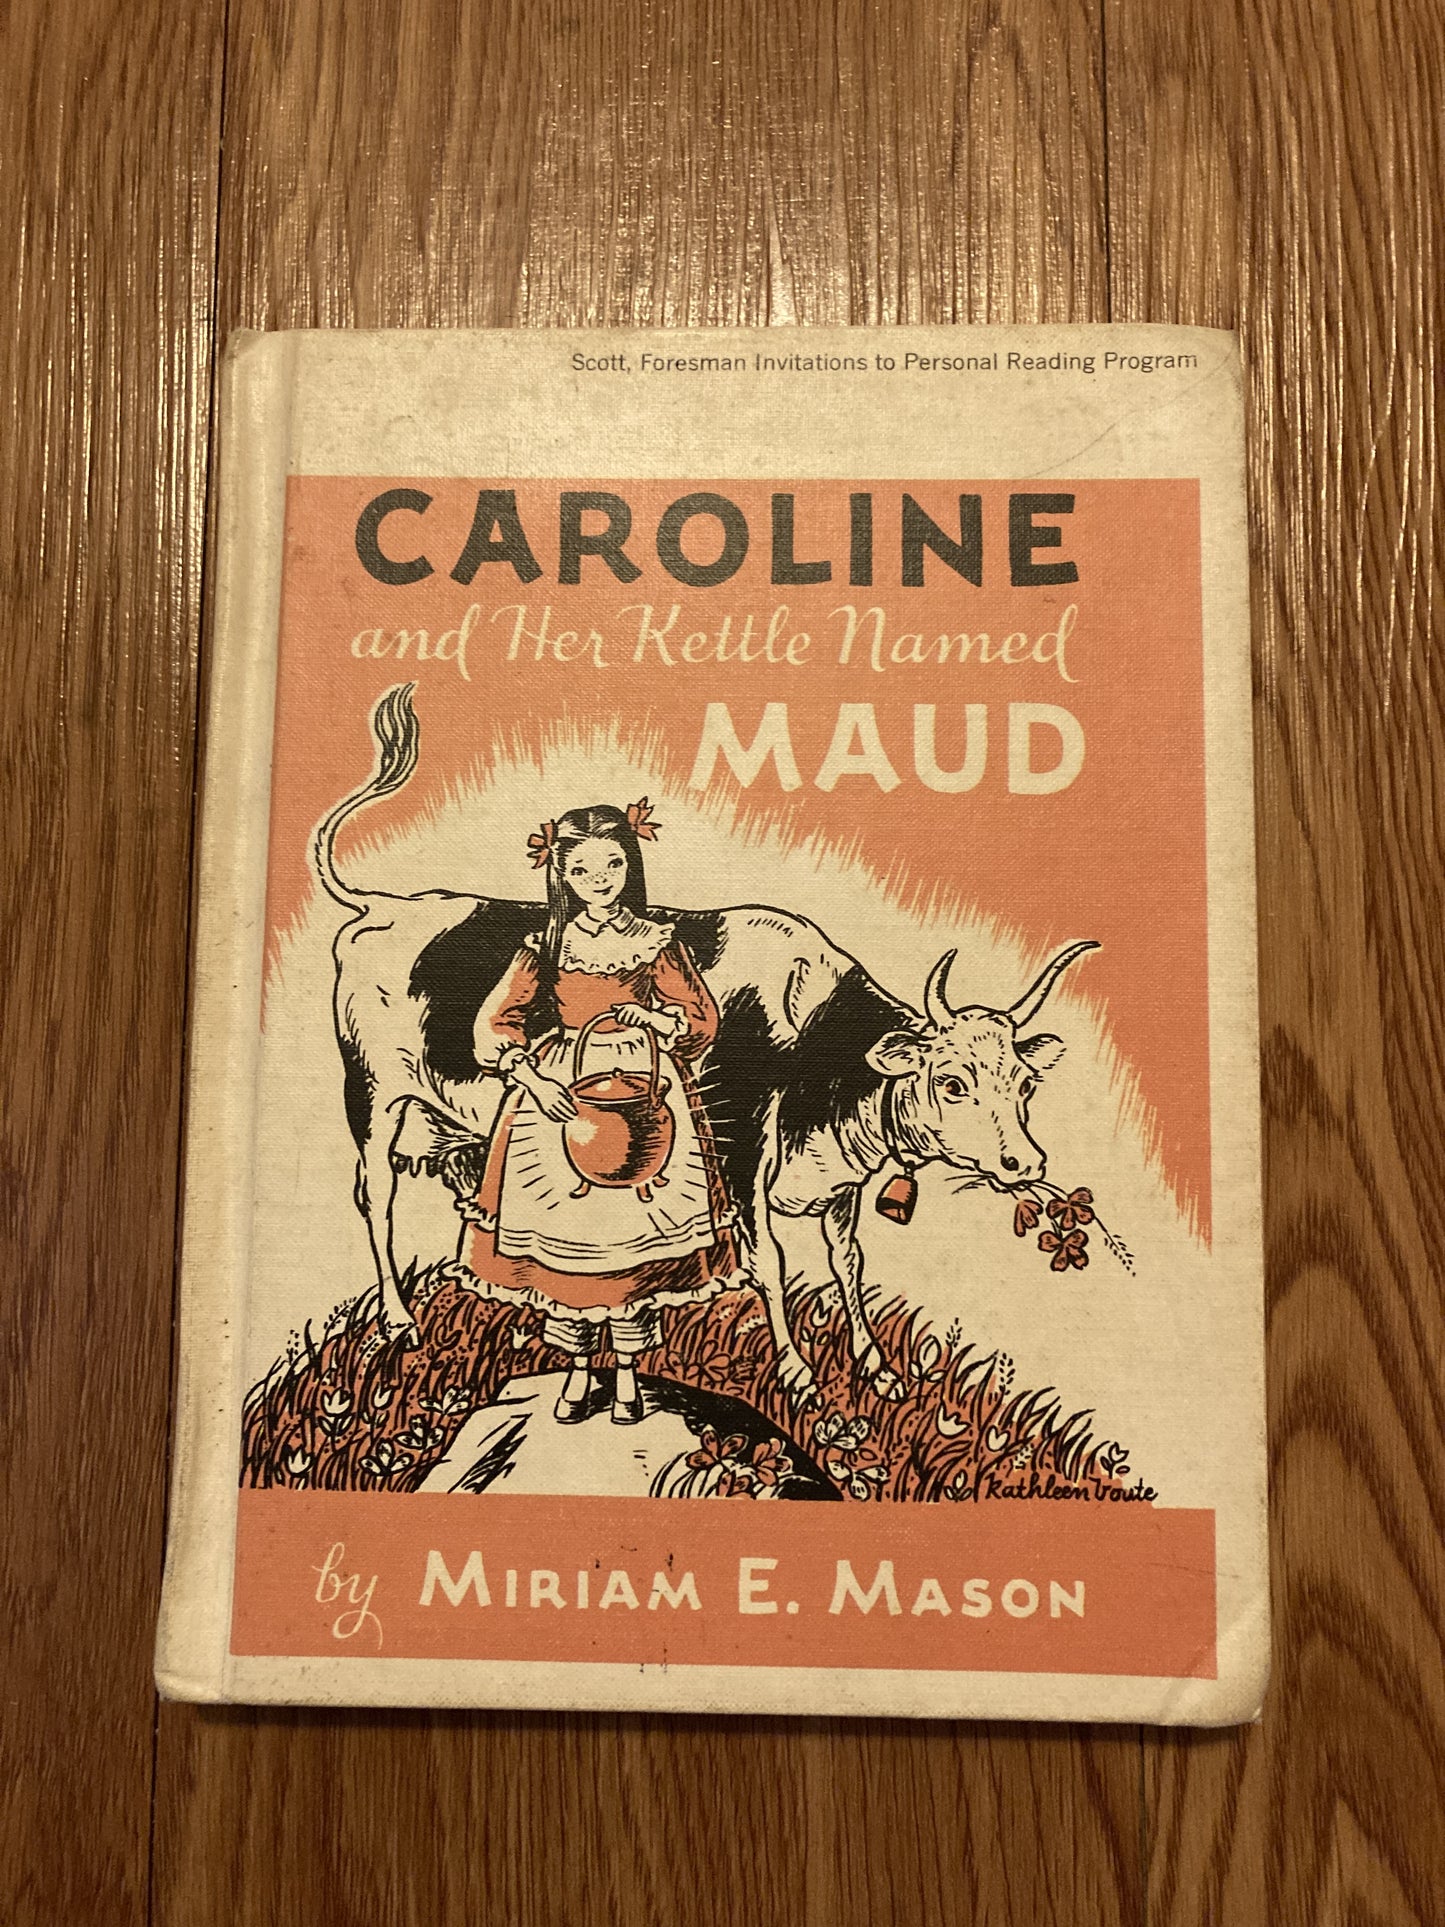 Caroline and Her Kettle Named Maud